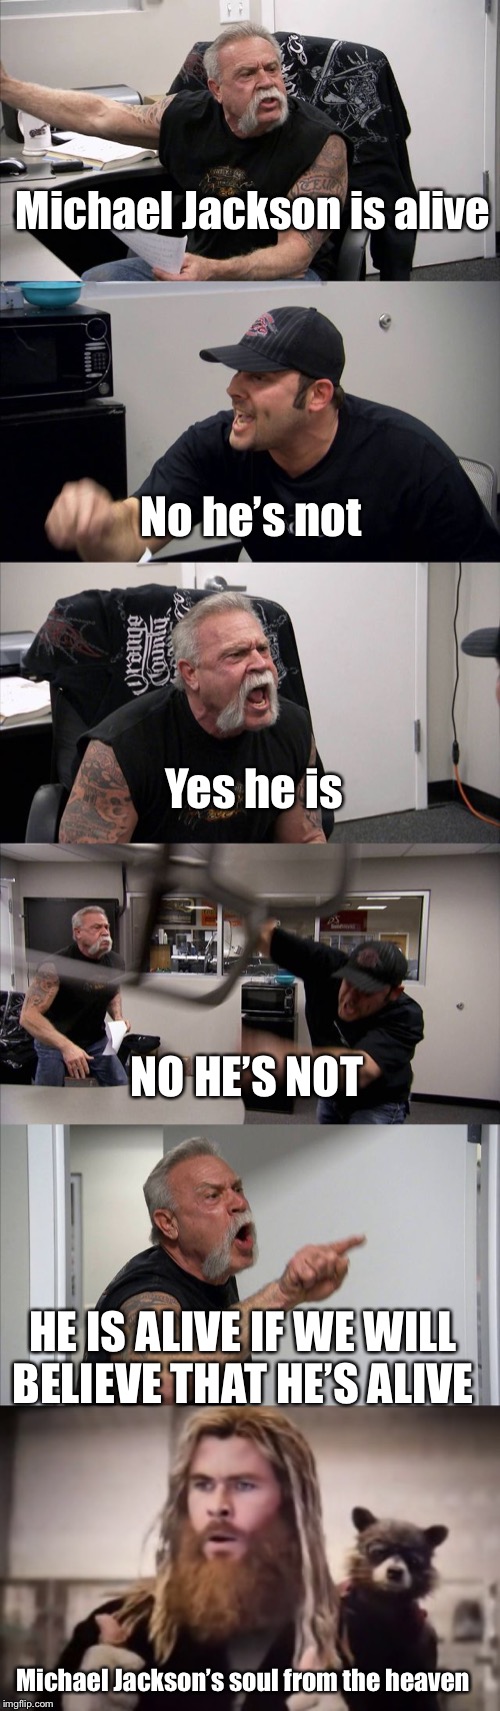 Michael Jackson is alive; No he’s not; Yes he is; NO HE’S NOT; HE IS ALIVE IF WE WILL BELIEVE THAT HE’S ALIVE; Michael Jackson’s soul from the heaven | image tagged in memes,american chopper argument,thor thumbs up | made w/ Imgflip meme maker